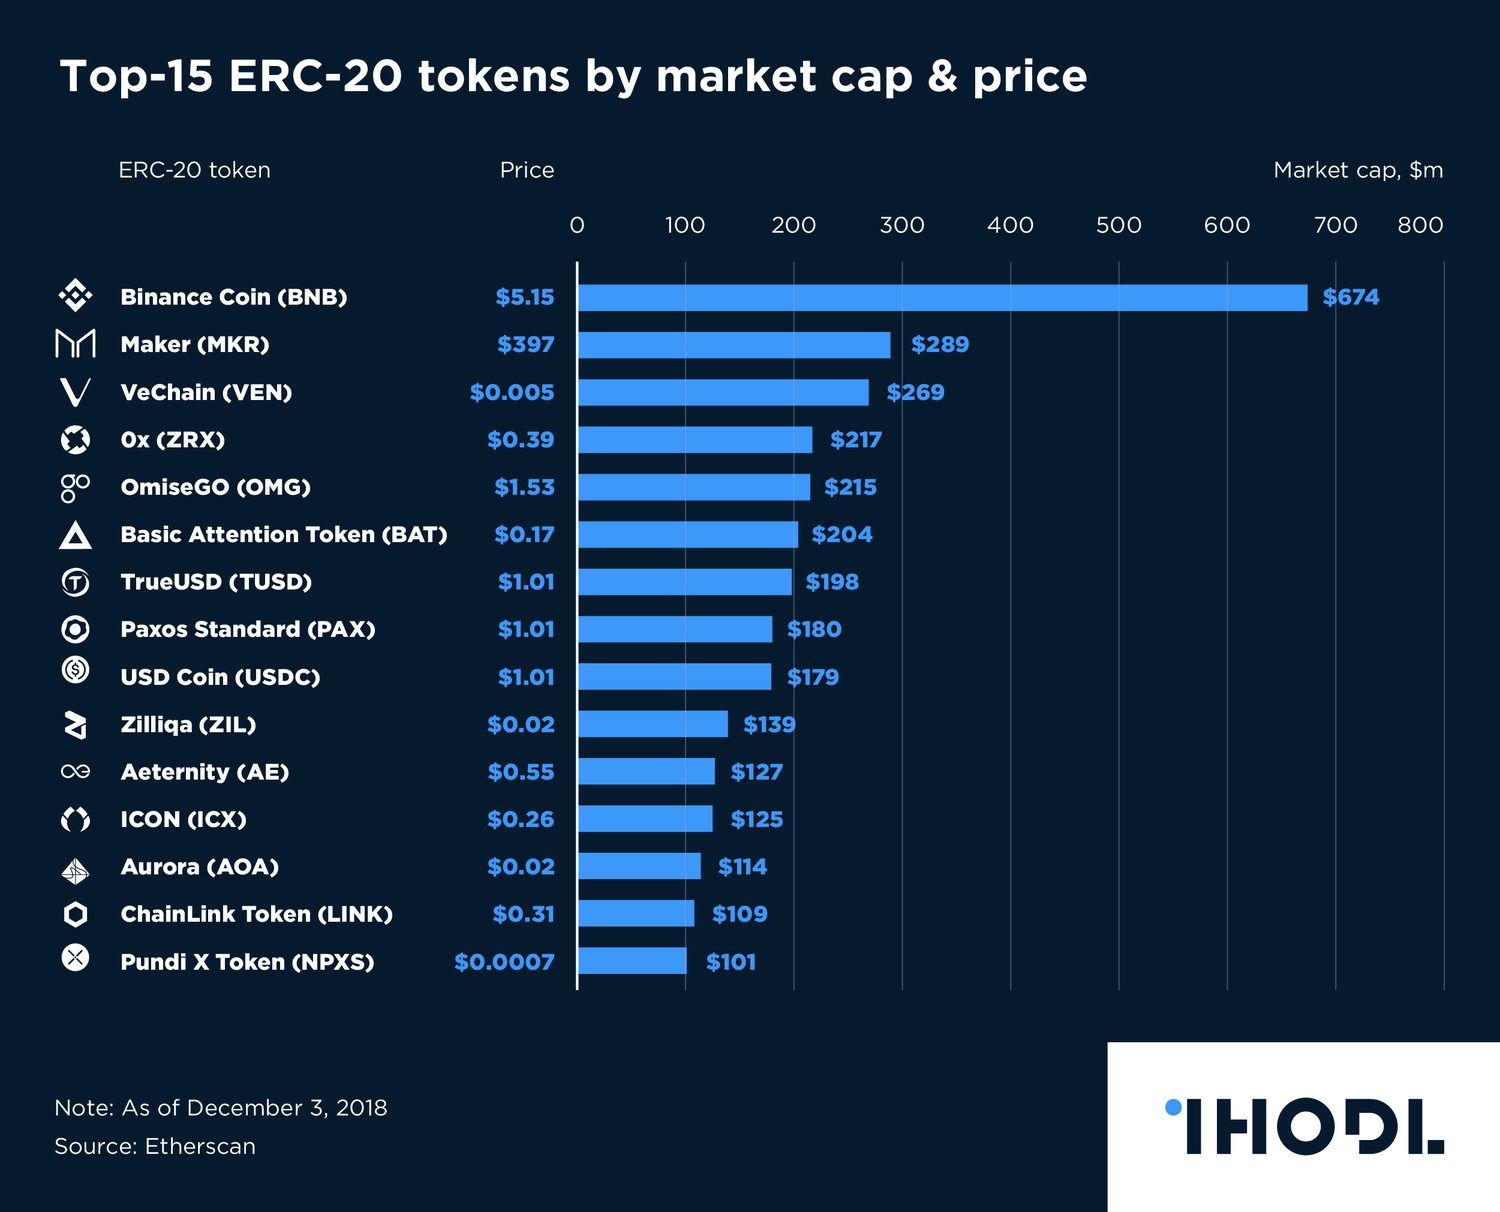 erc-20 tokens uncorrelated from crypto market